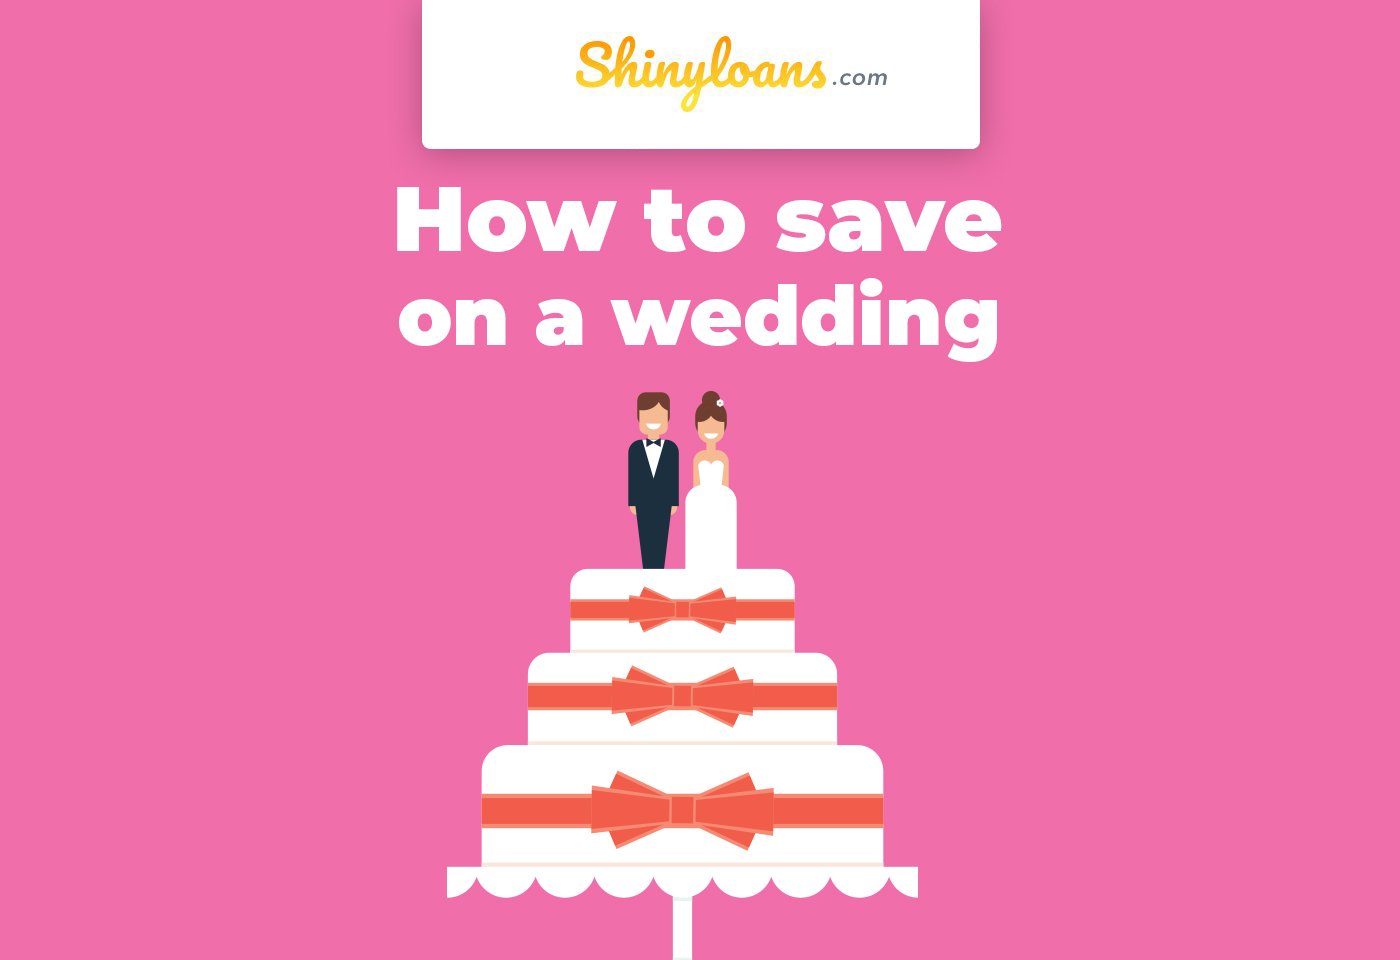 How to Save on a Wedding: 8 Tips